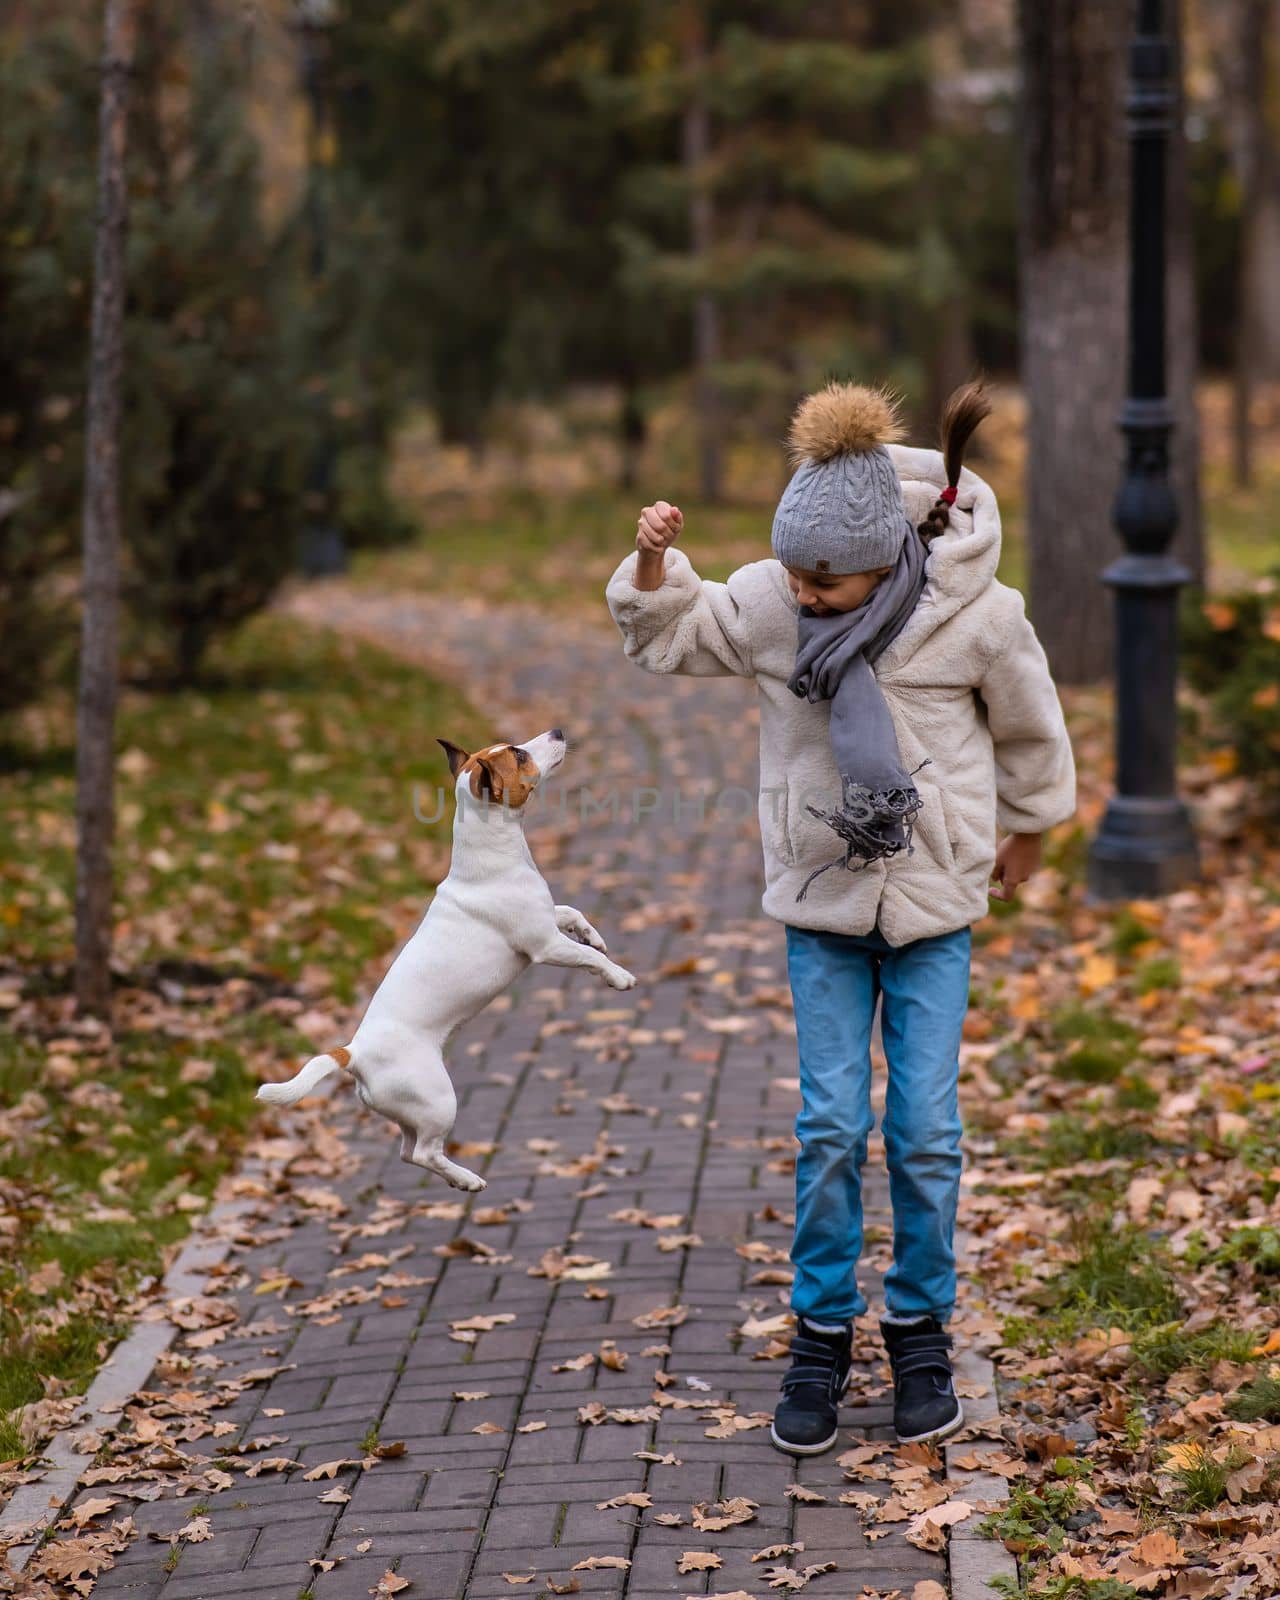 Caucasian girl playing with a dog for a walk in the autumn park